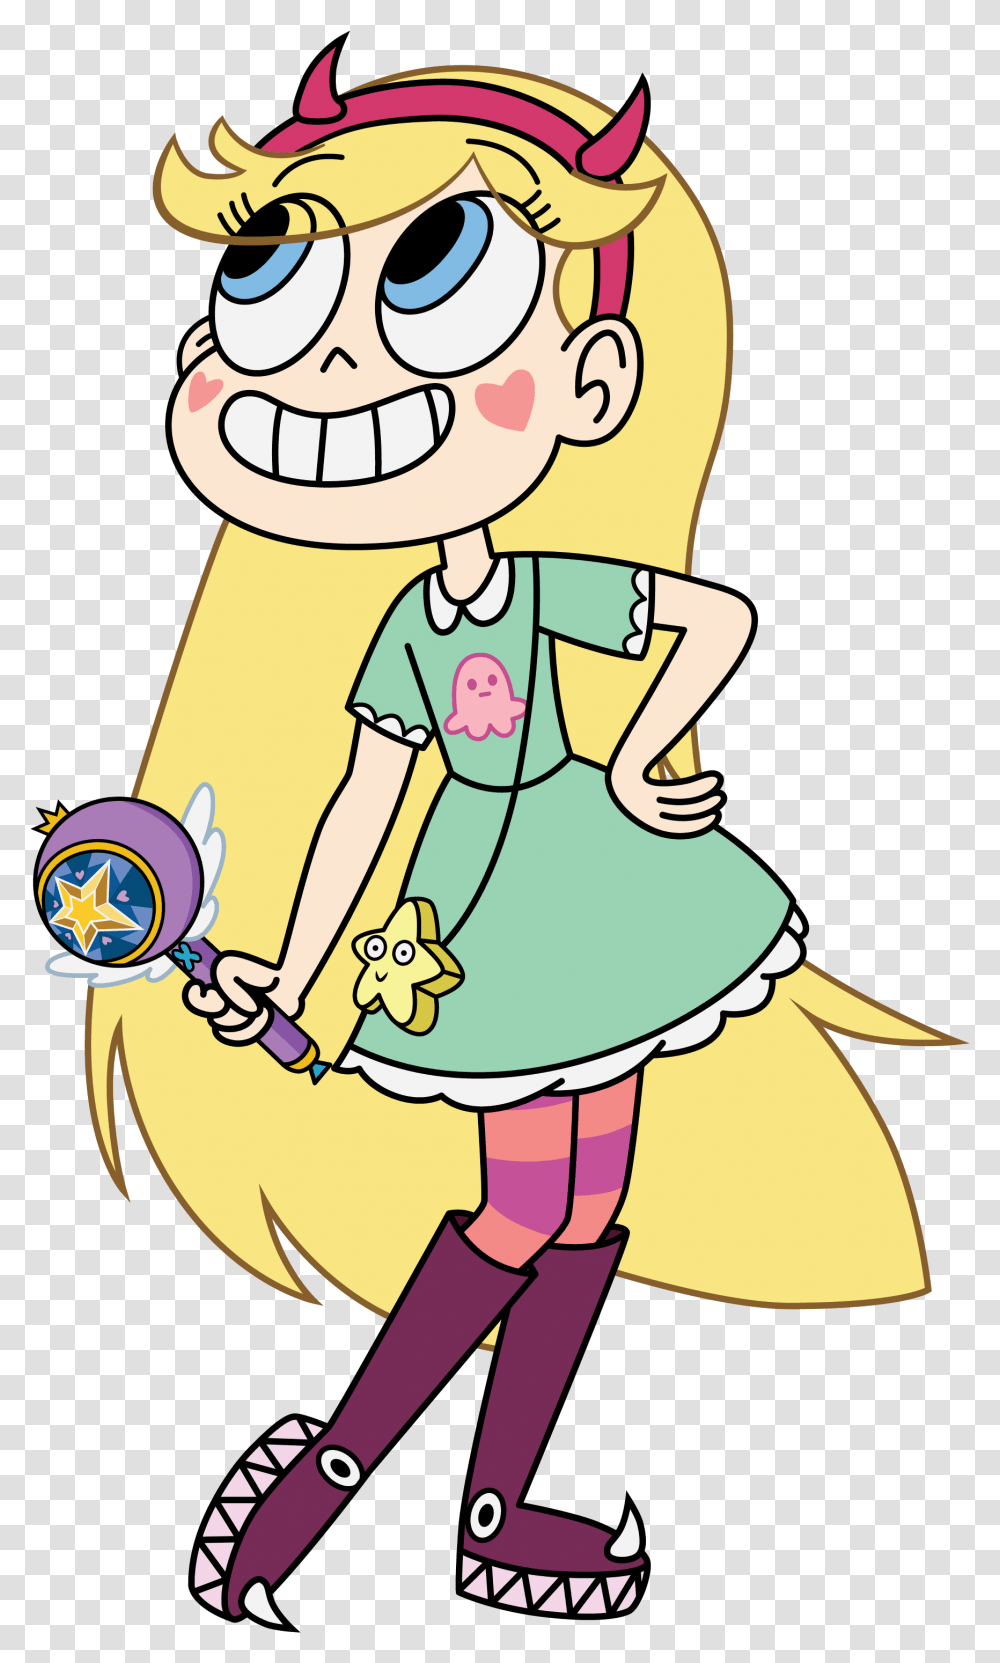 Star Butterfly Image Butterfly Star Vs The Forces Of Evil, Doodle, Drawing, Art, Outdoors Transparent Png